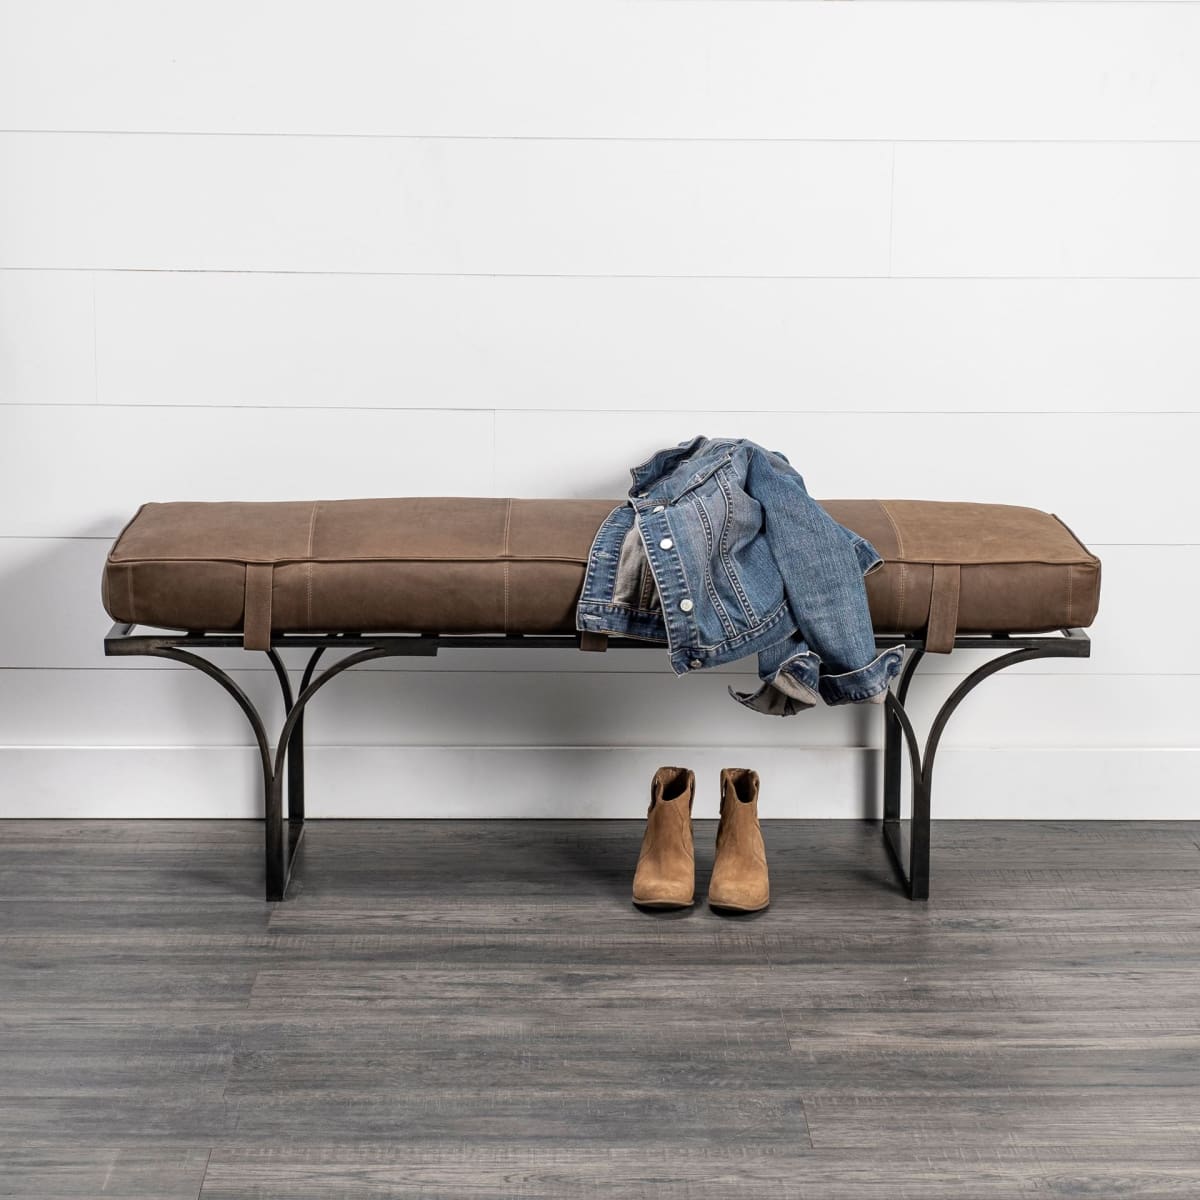 Jessie Bench Brown Leather | Black Metal - benches